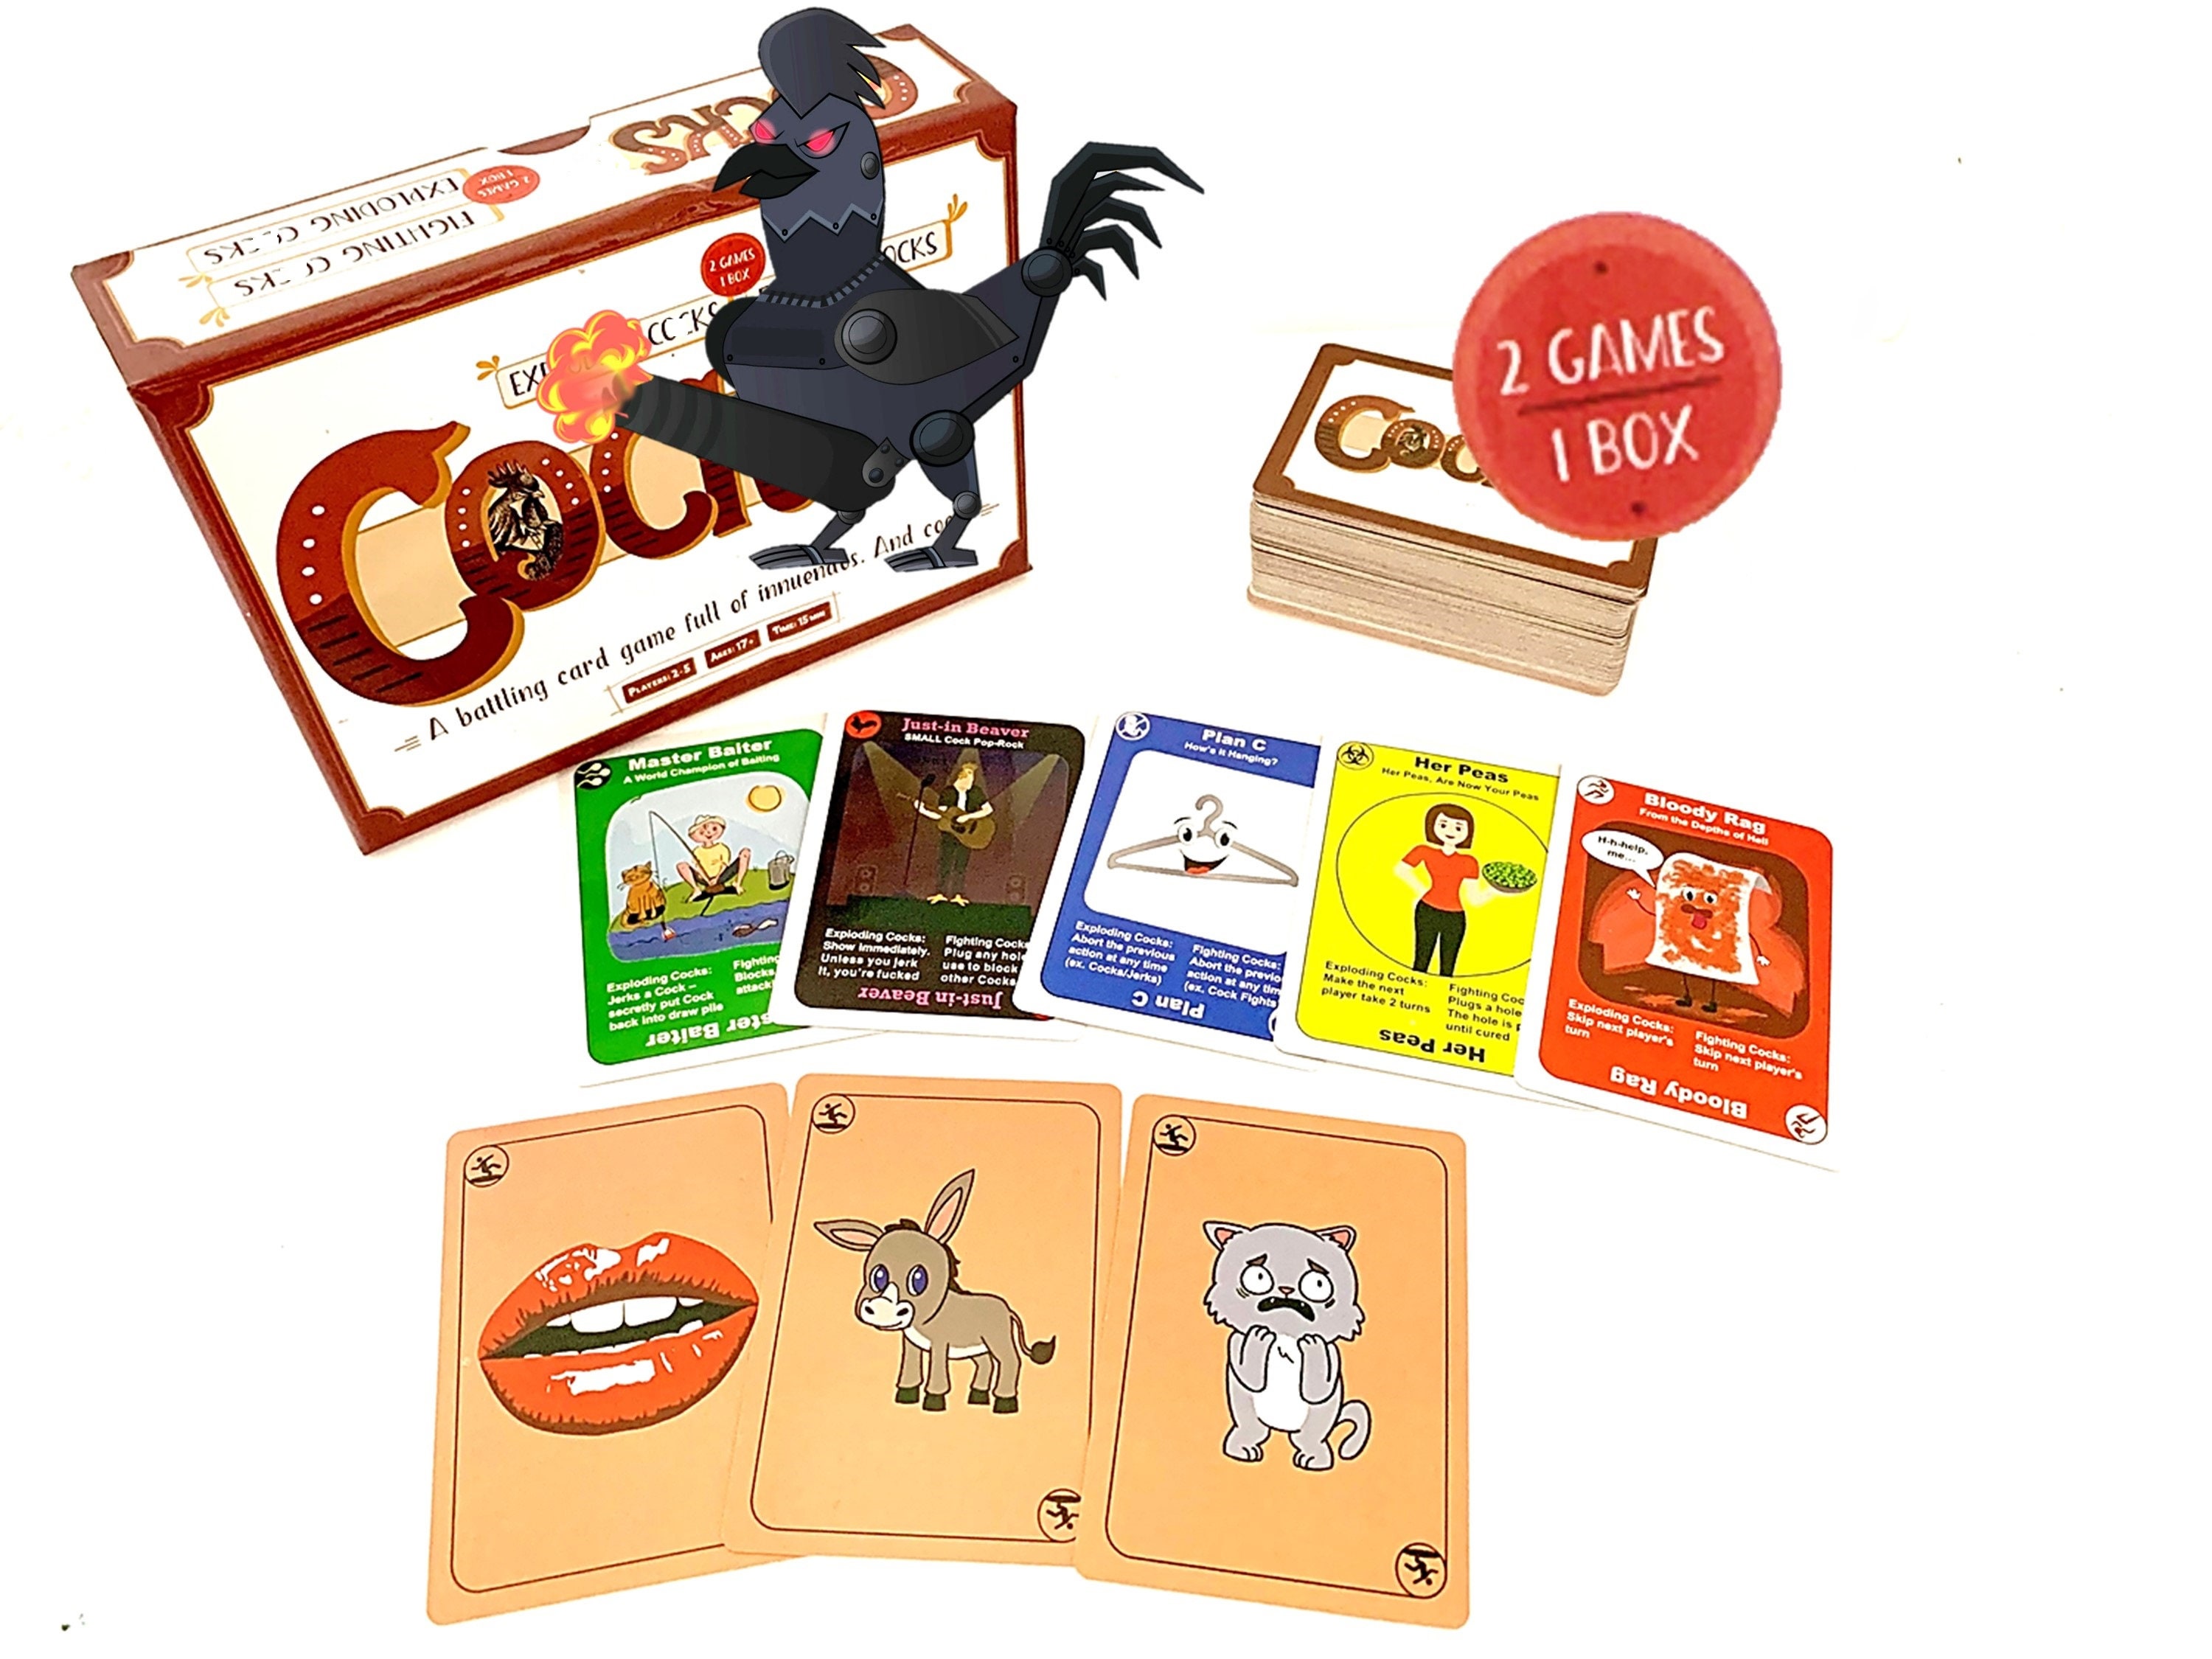 Right or Racist - Adult Party Game Hilarious Drinking NSFW - Secret Santa Gift